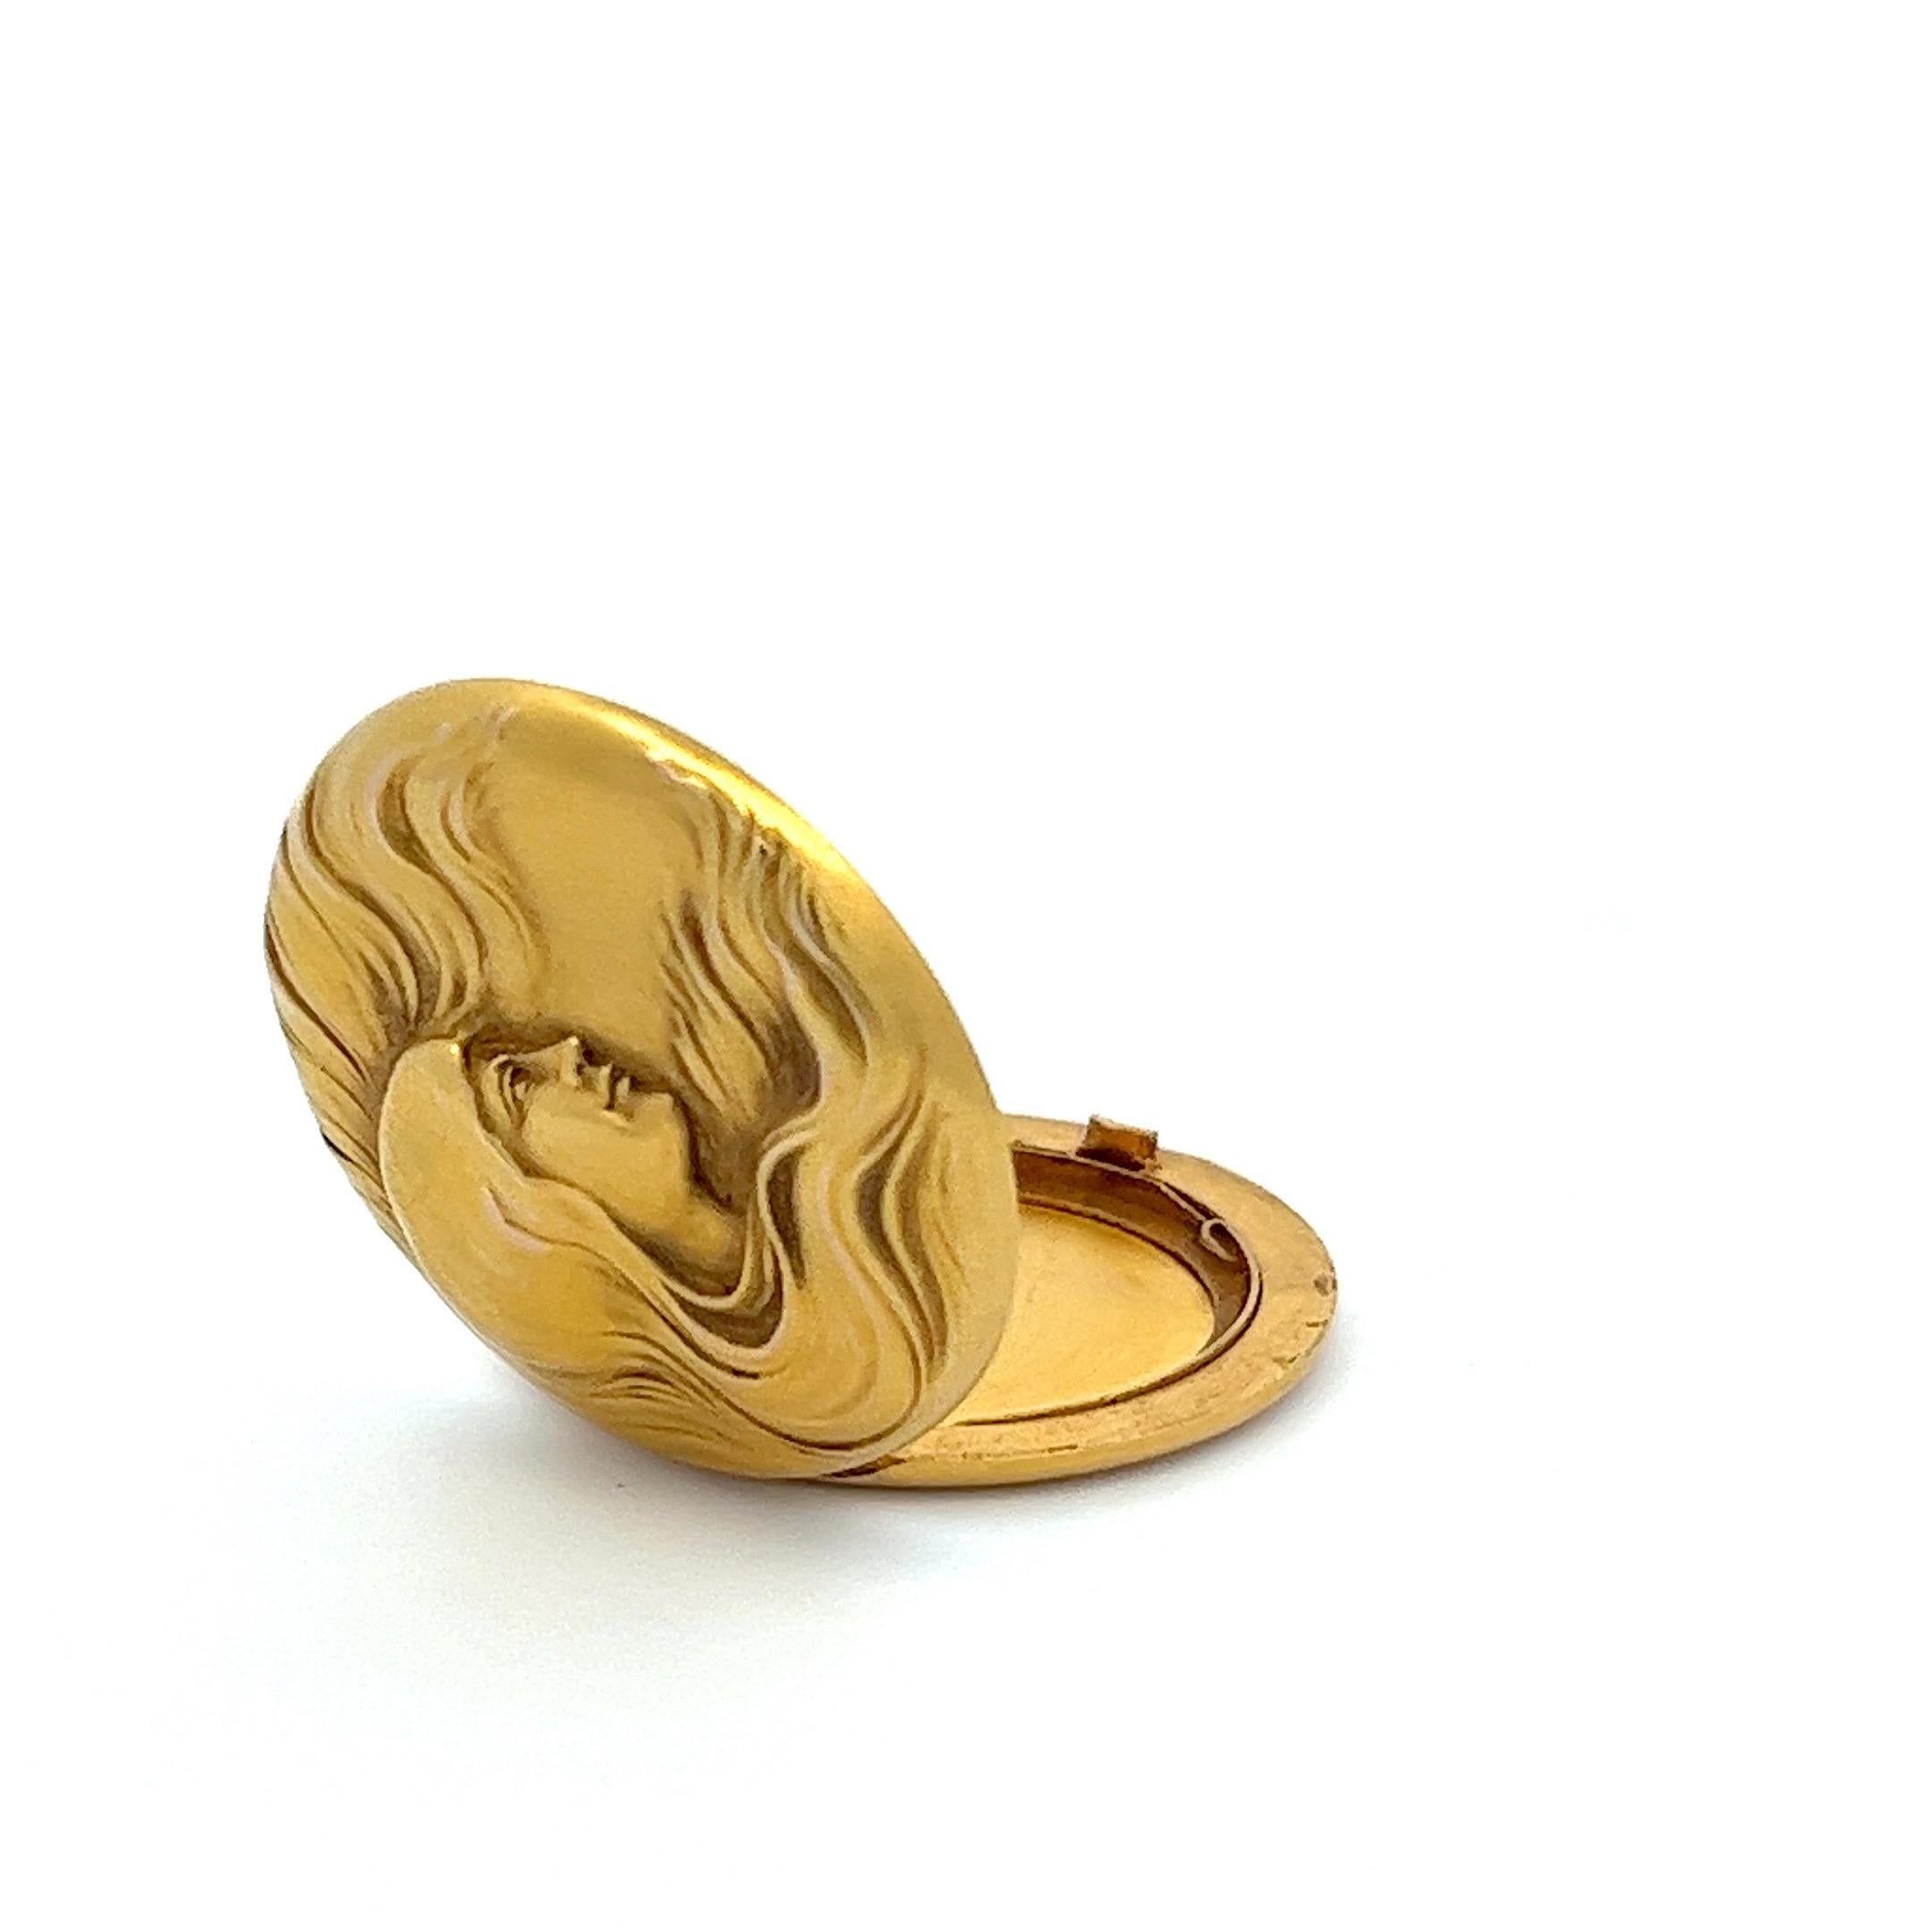 This 14 karat yellow gold medallion is a genuine artifact from the Art Nouveau period. It prominently features a woman, her gaze directed to the side and her long hair in fluid motion.

The locket captures the typical motifs of Art Nouveau,